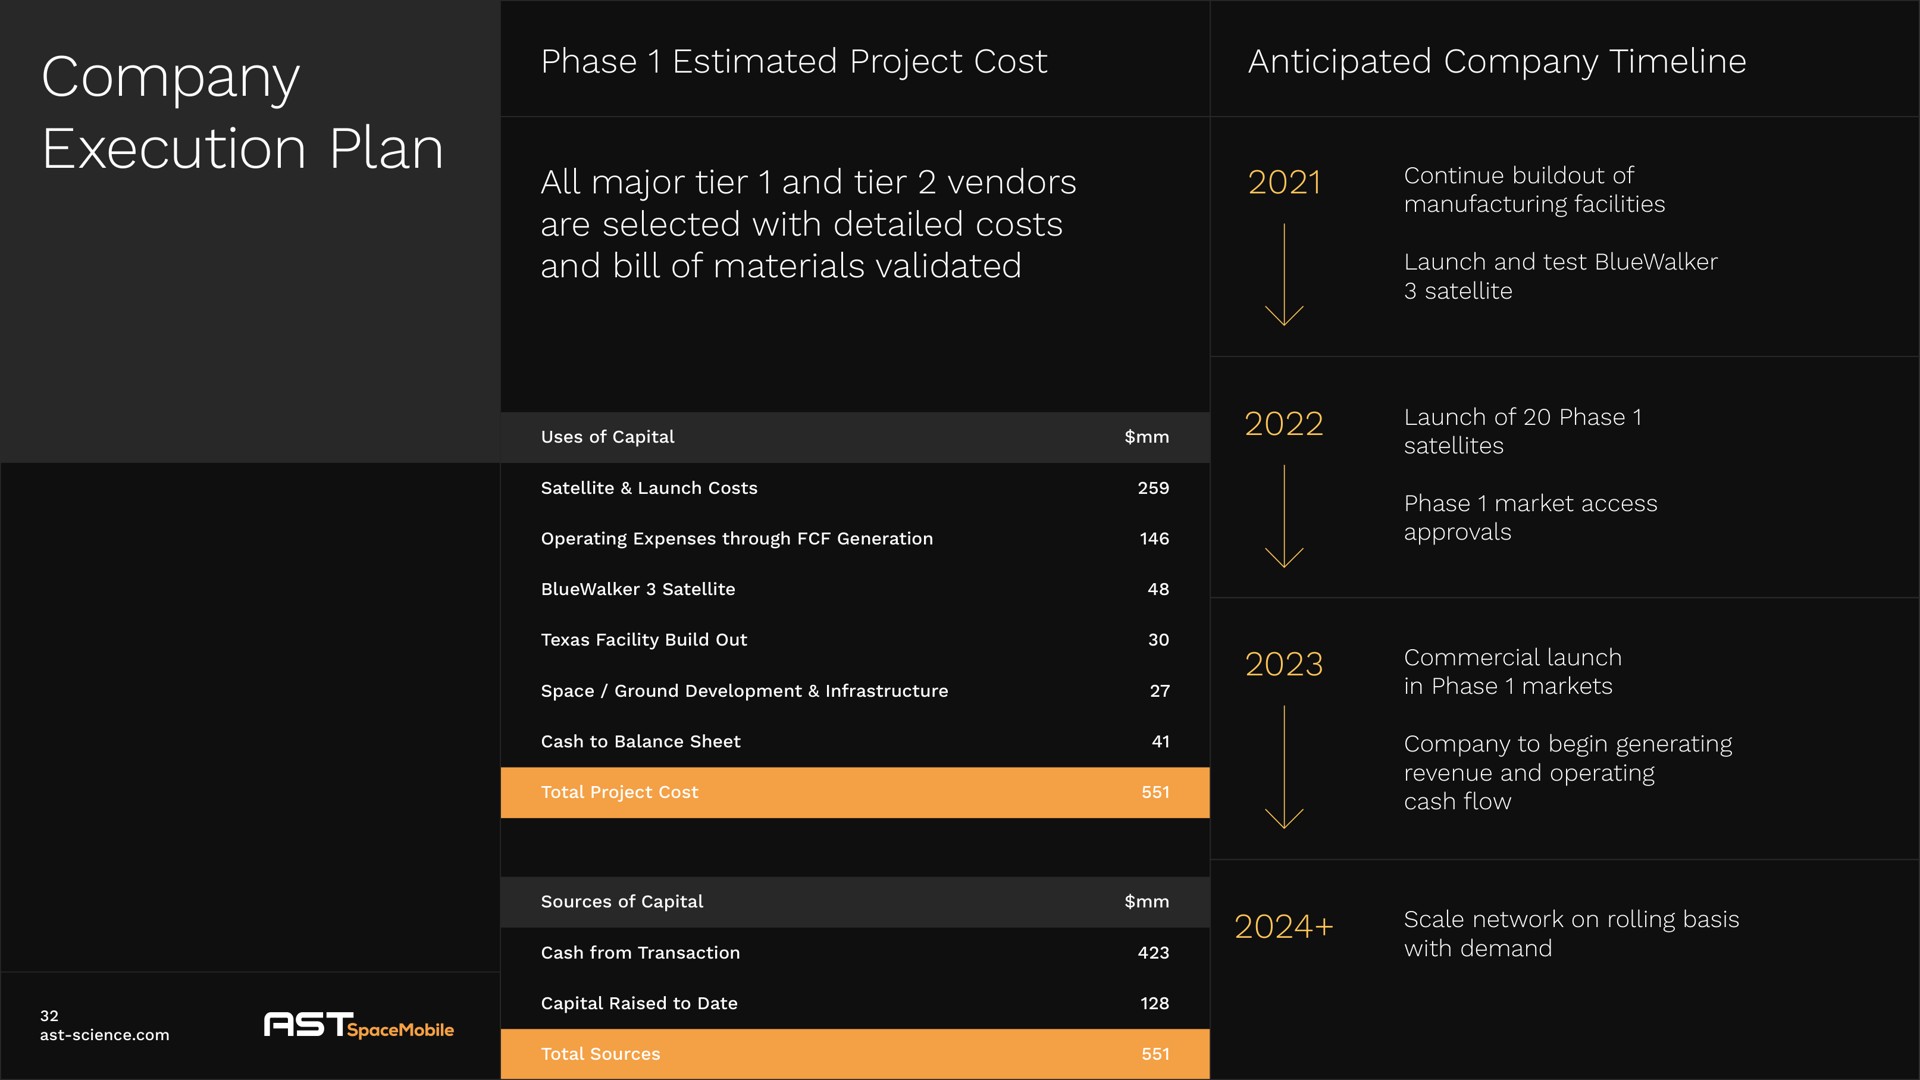 company execution plan phase estimated project cost anticipated company all major tier and tier vendors are selected with detailed costs and bill of materials validated dod do | AST SpaceMobile